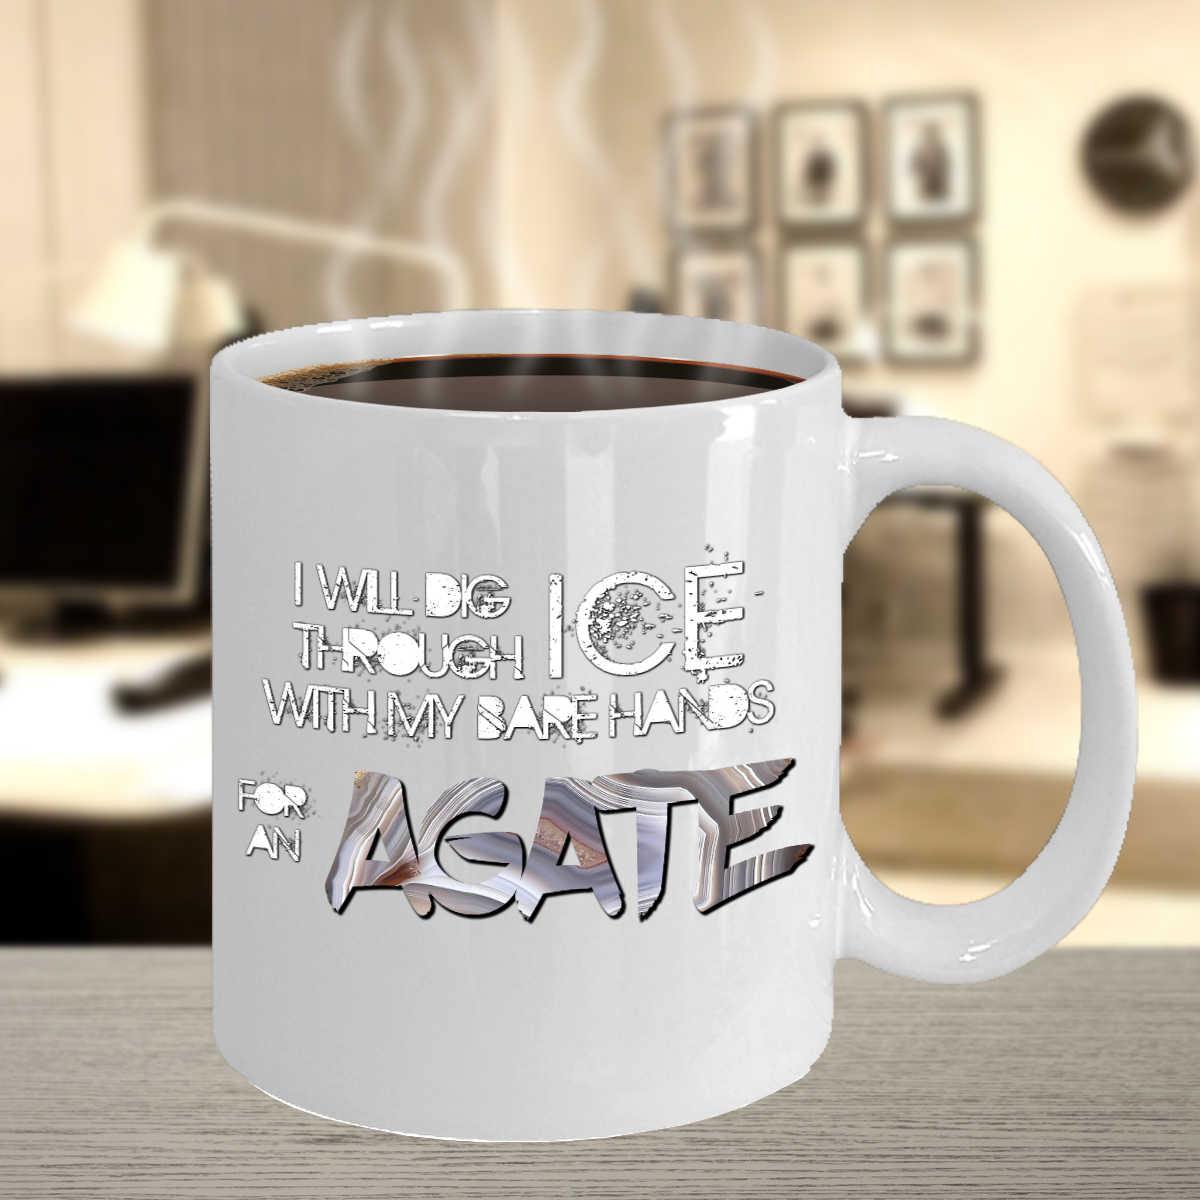 Will Dig Through Ice With Bare Hands for Agate Mug